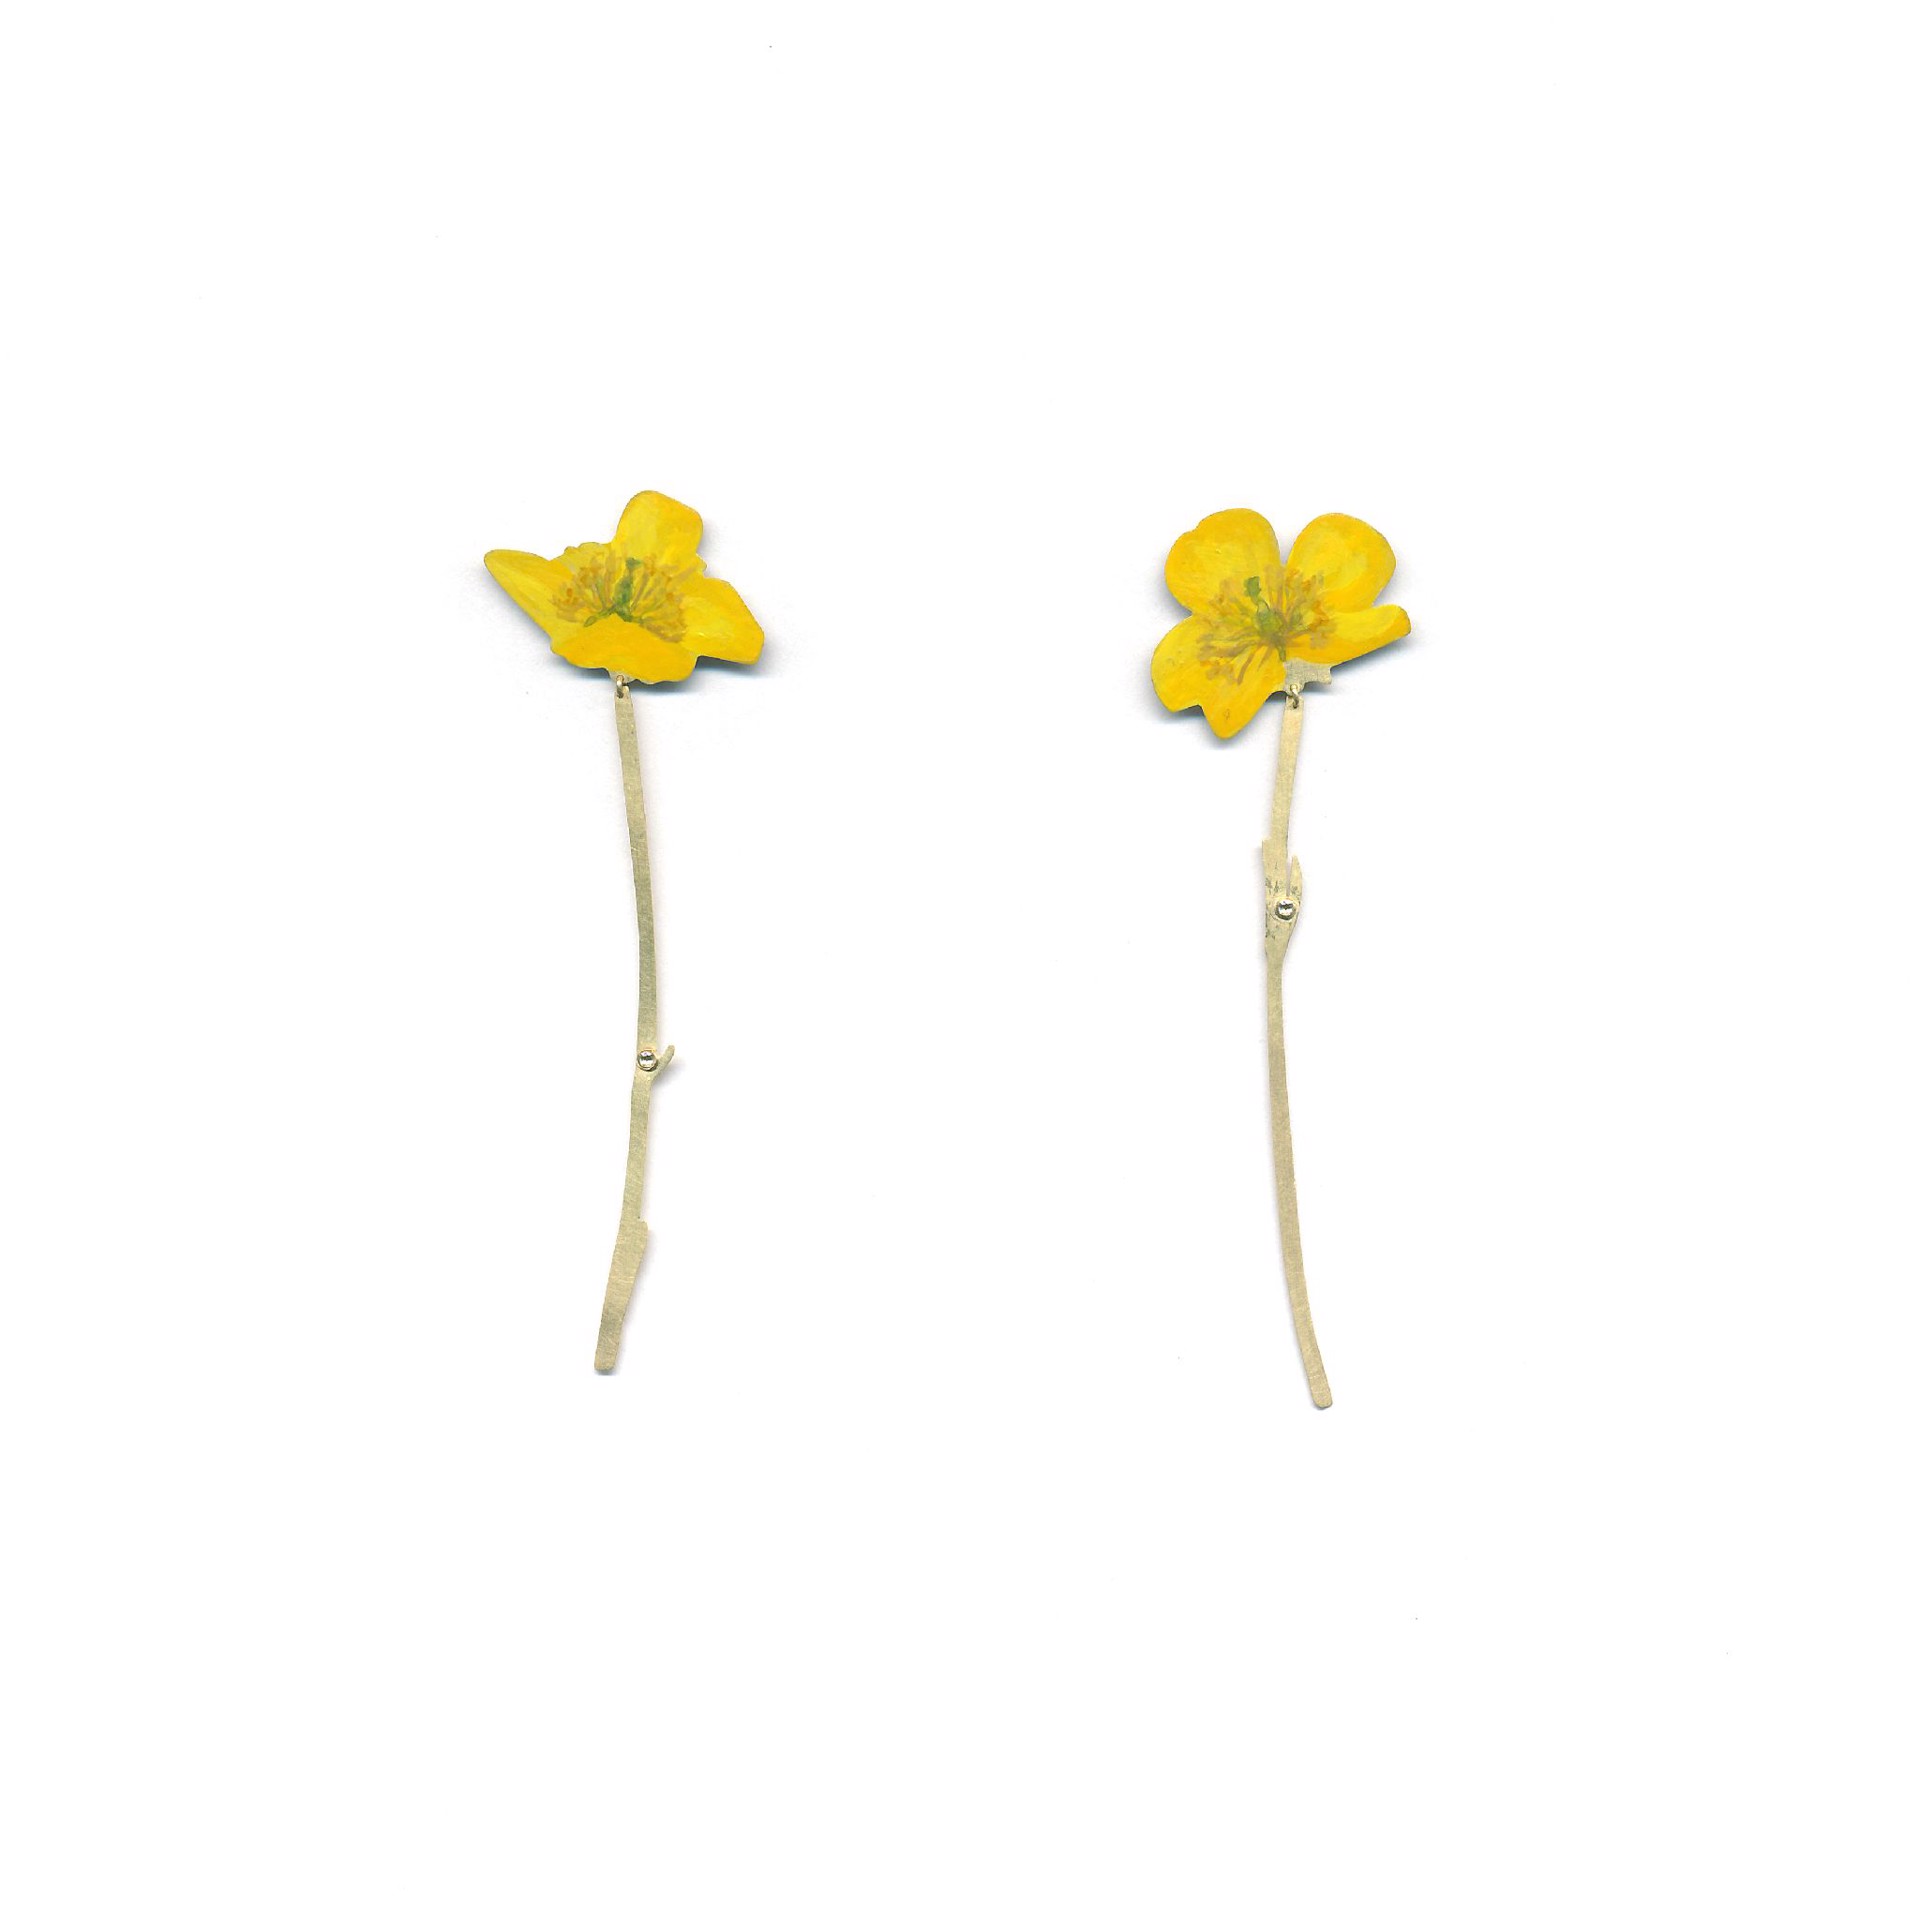 Natura Morta: Buttercup Drop Earrings by Christopher Thompson-Royds